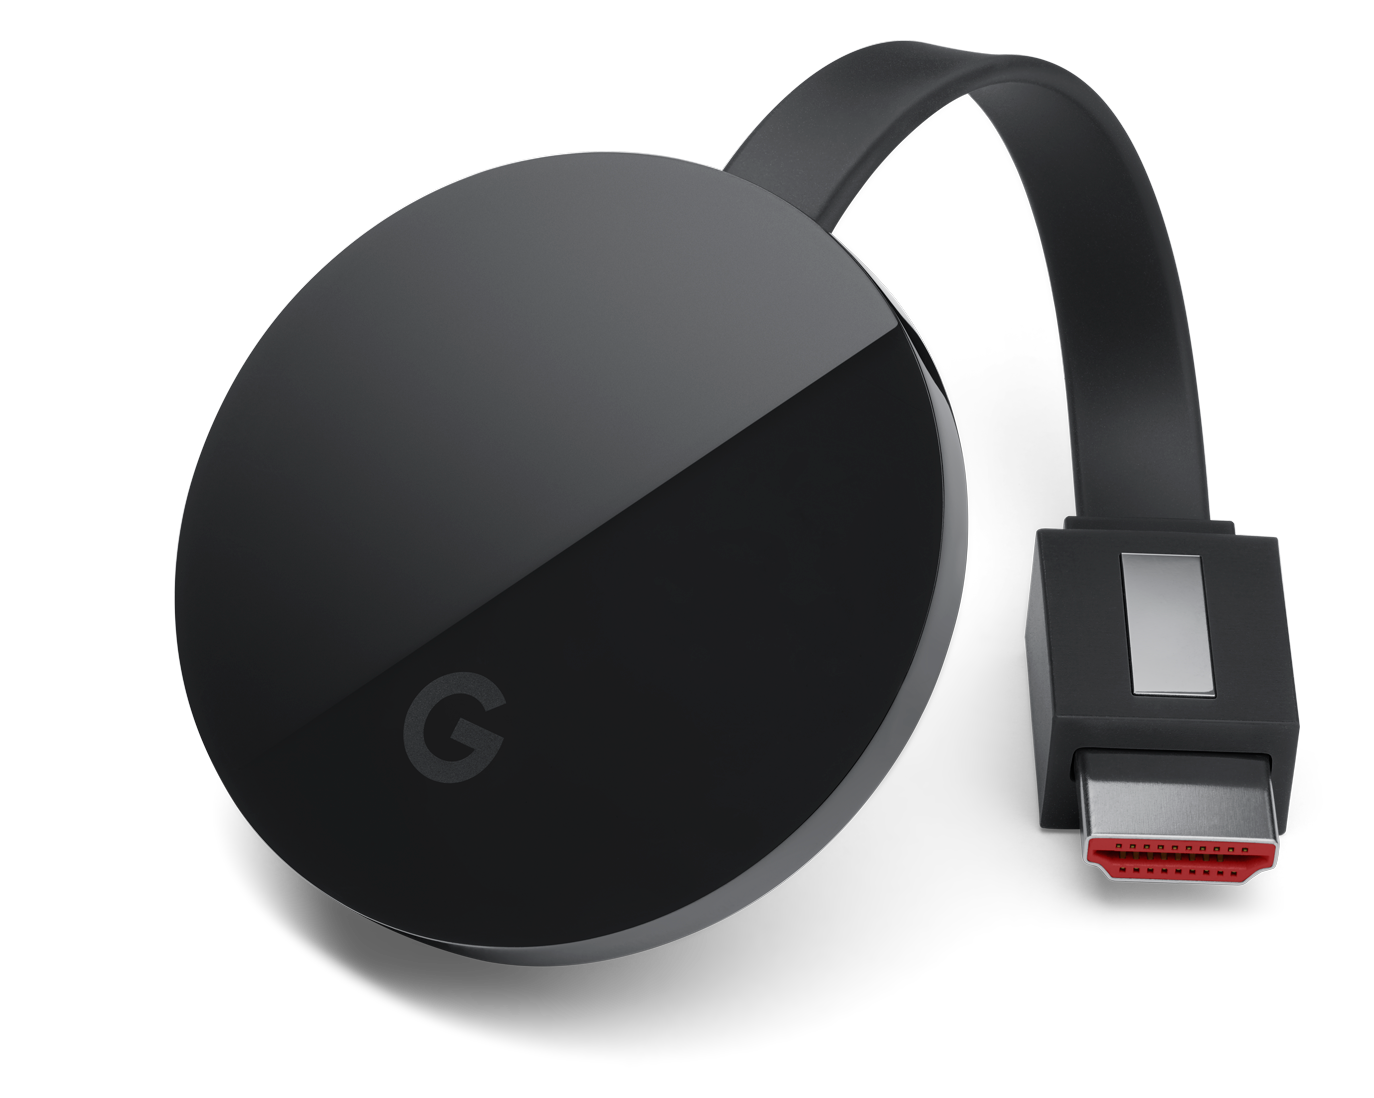 Will the Chromecast with Google TV also arrive in the Netherlands?